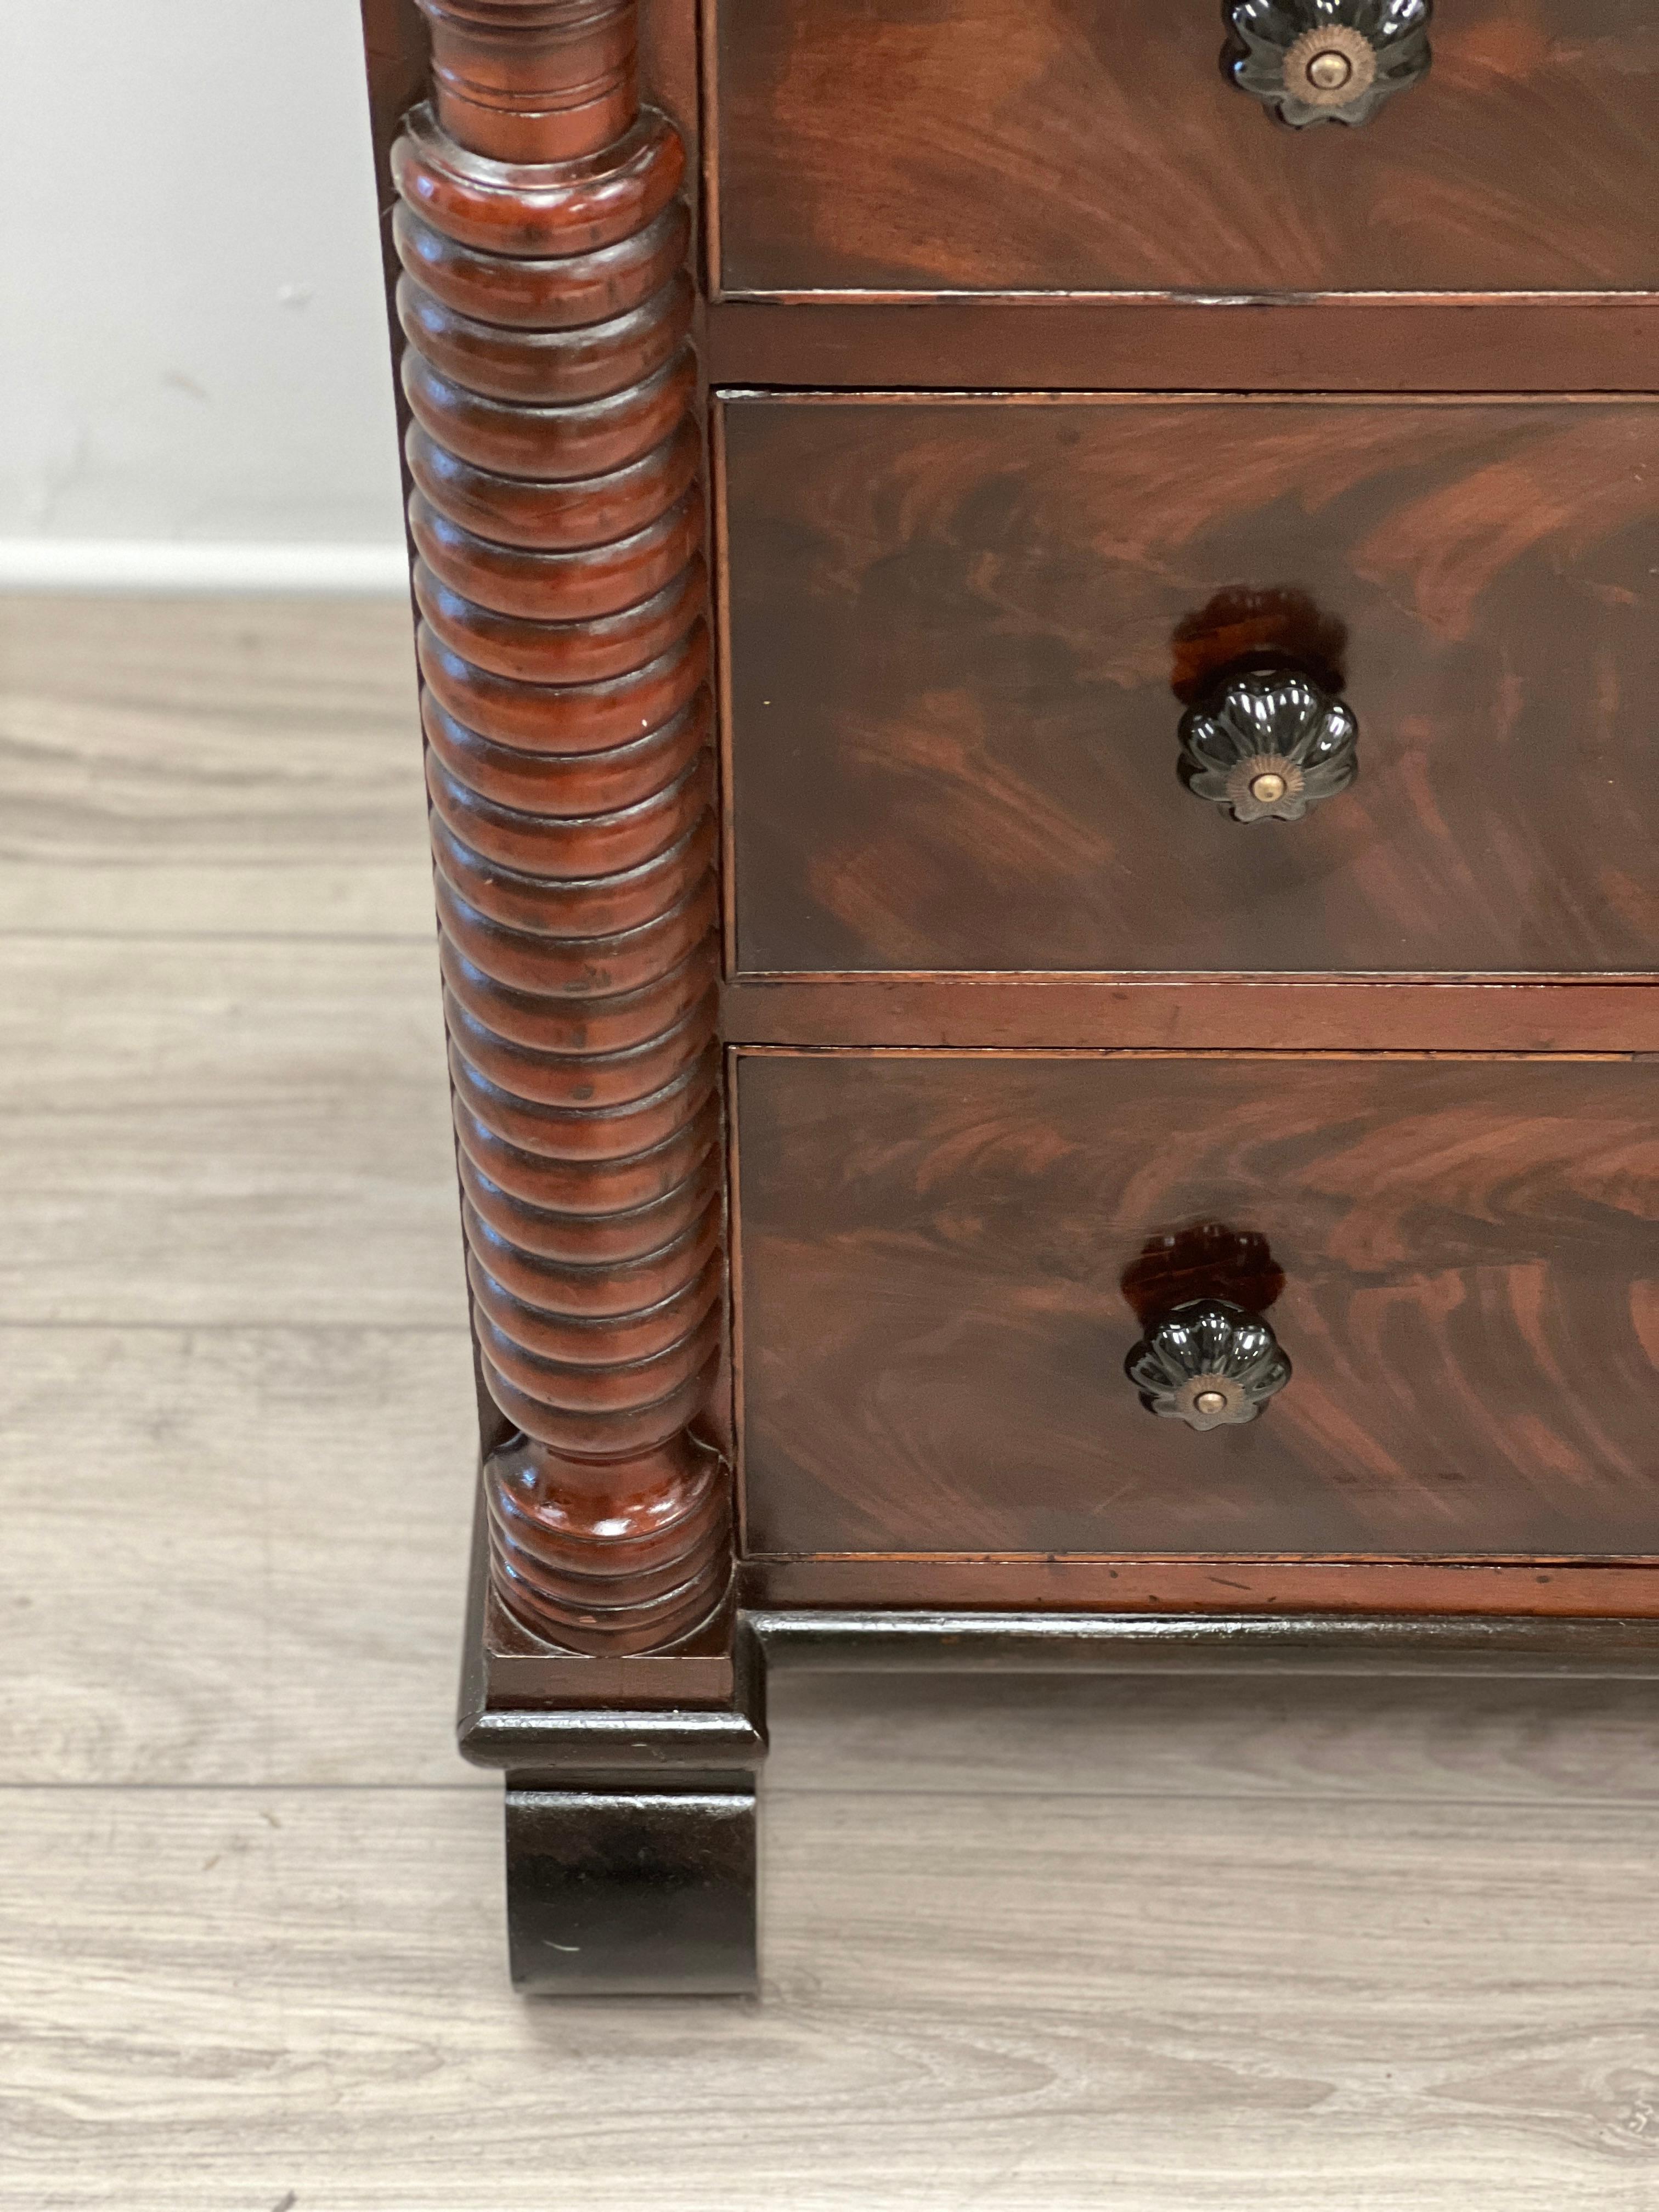 Featured is a very handsome American Empire chest of drawers built from gorgeous flamed crotched mahogany. This is four drawers built with hand cut dovetails. Each drawer is fitted with black glass pulls that were added at a later date. This chest